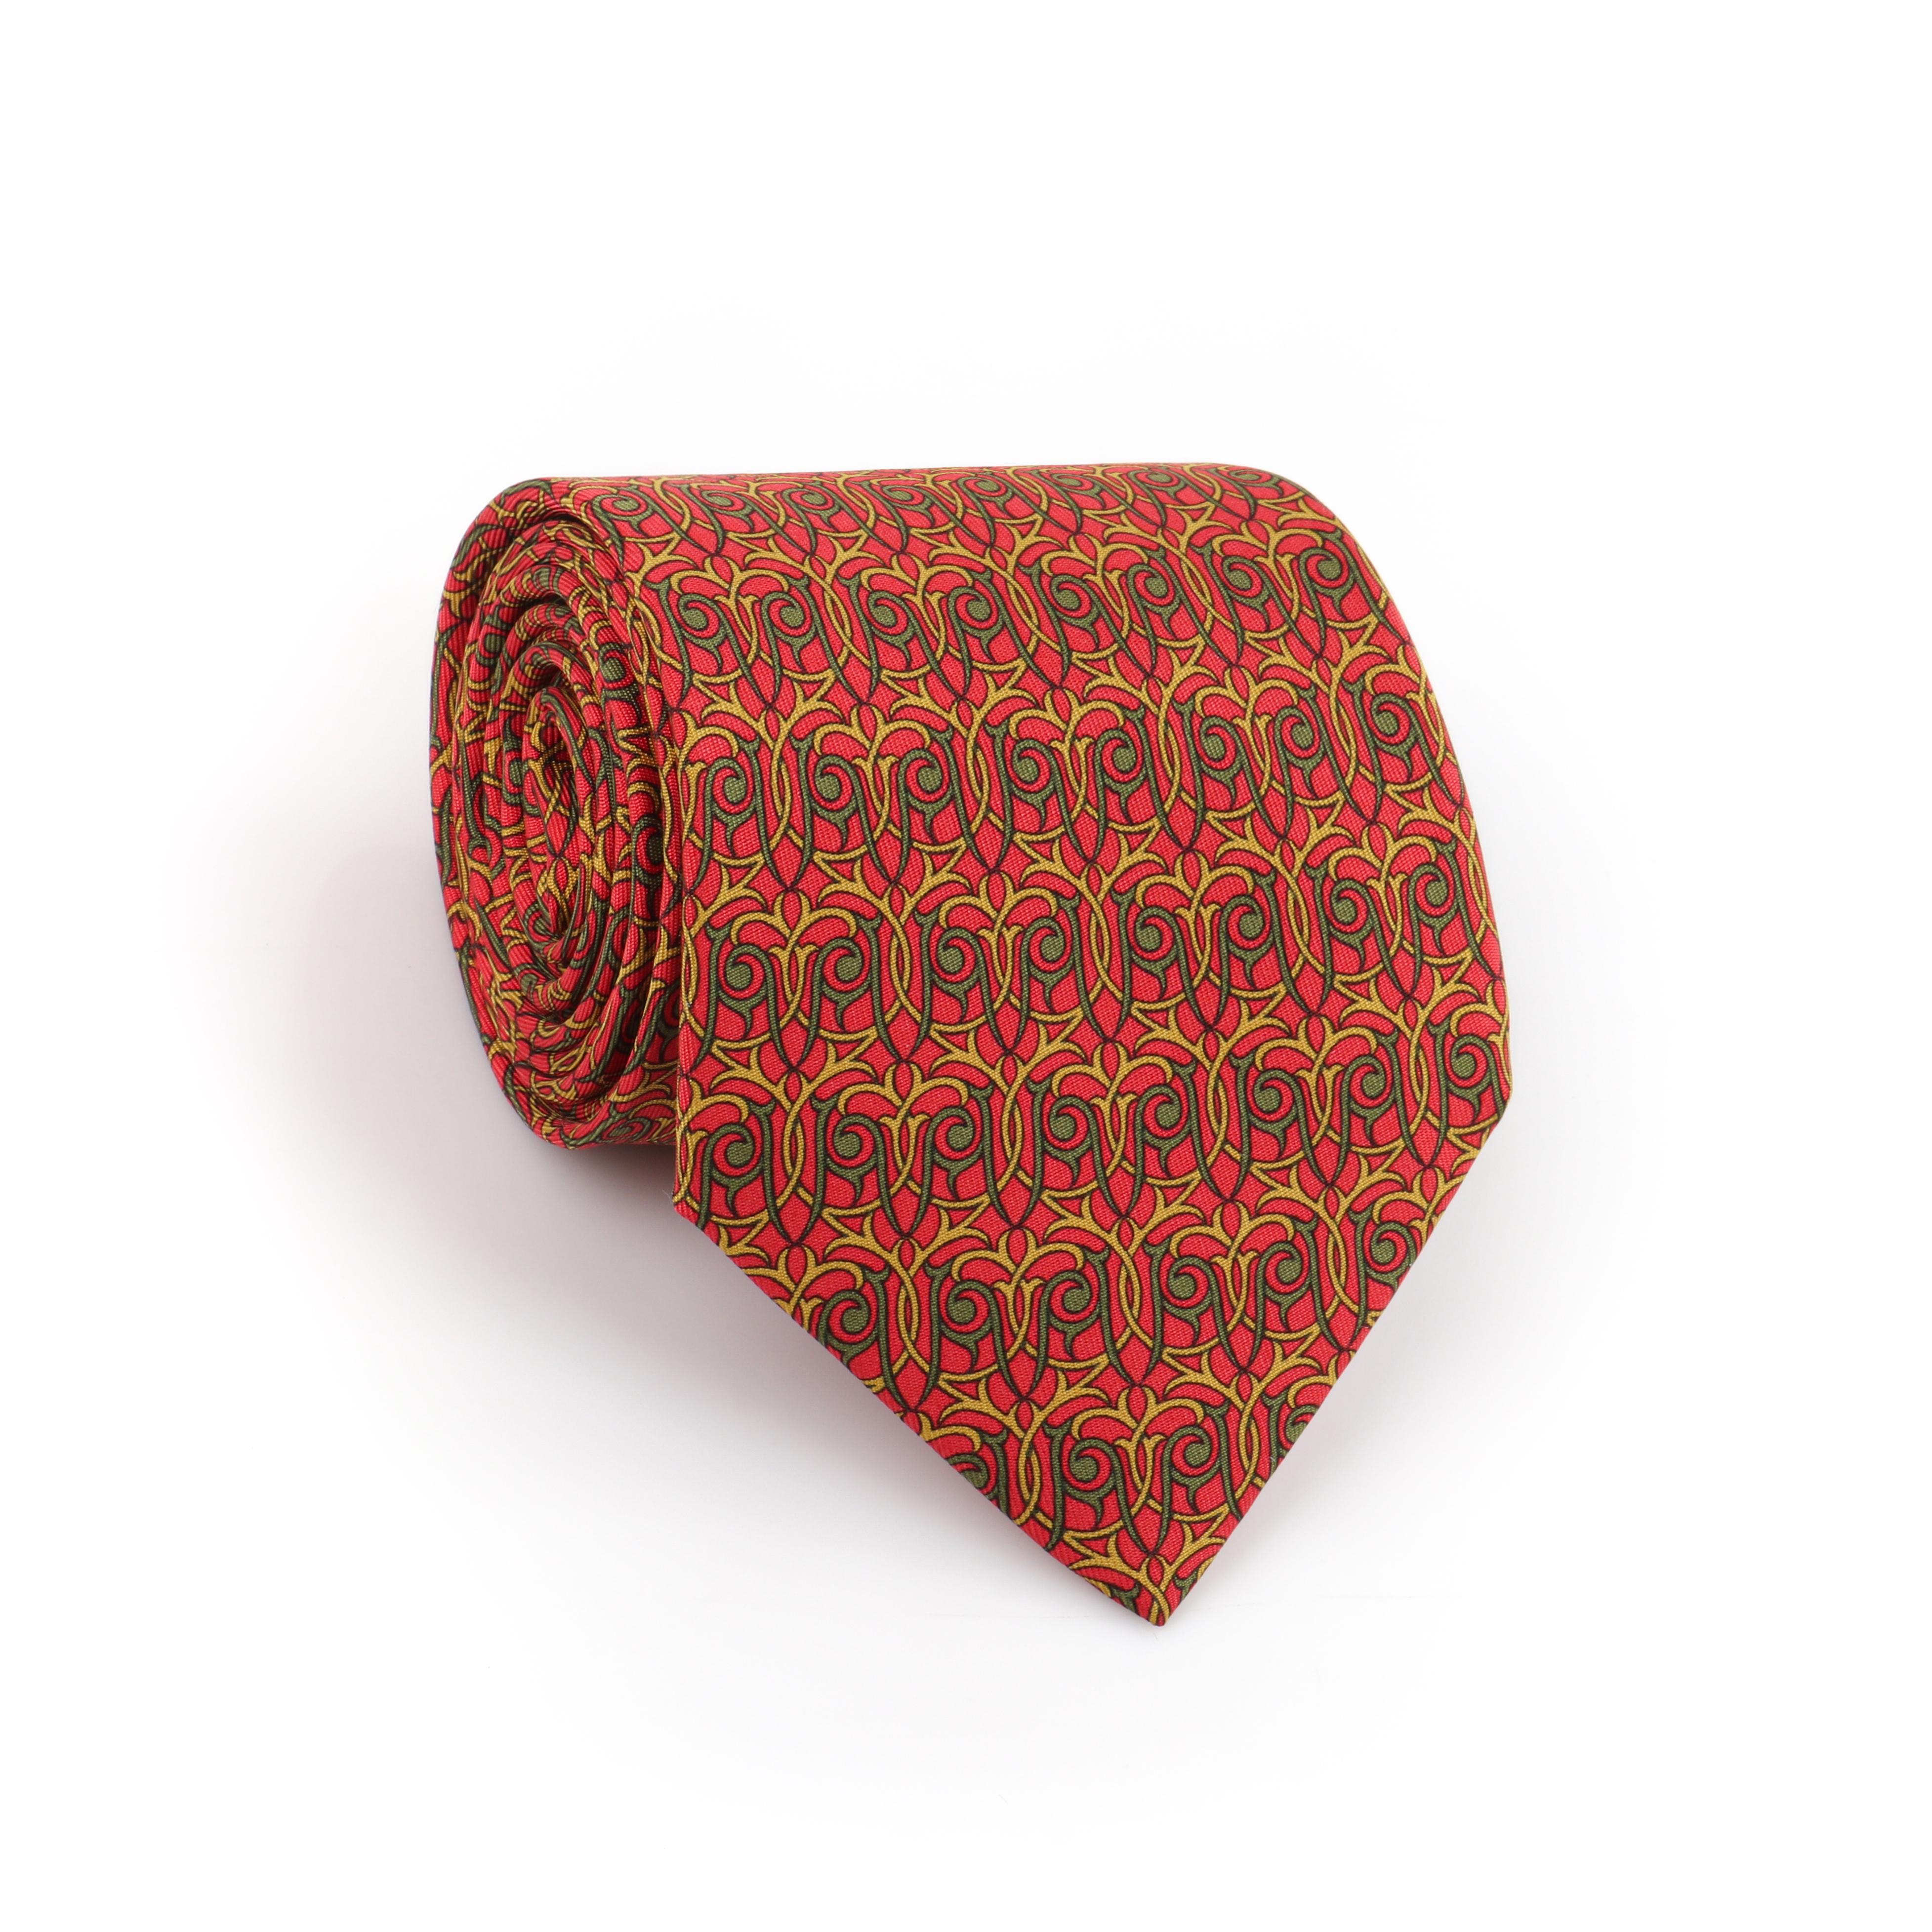 HERMES Men’s 7928 MA 5-Fold Red Green Yellow Intertwine Geometric Print Neck Tie
 
Brand / Manufacturer: Hermes
Style: Neck tie
Color(s): Shades of red, green, and yellow
Lined: Yes
Marked Fabric Content: 100% silk  
Additional Details / Inclusions: